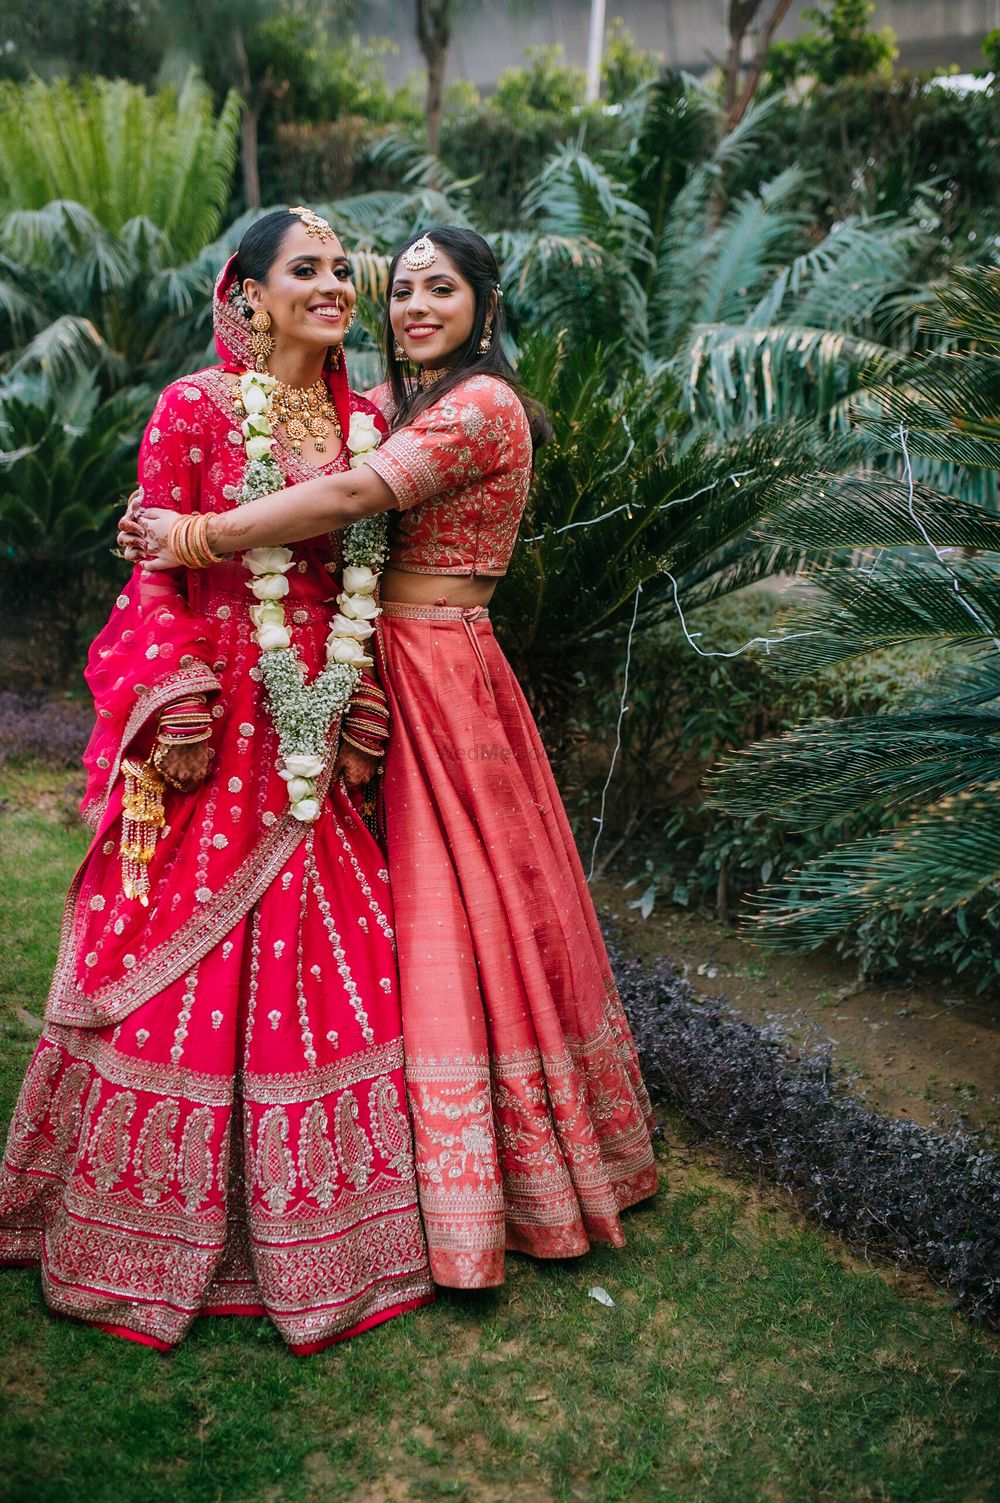 Photo of Bride with sister on the wedding day.